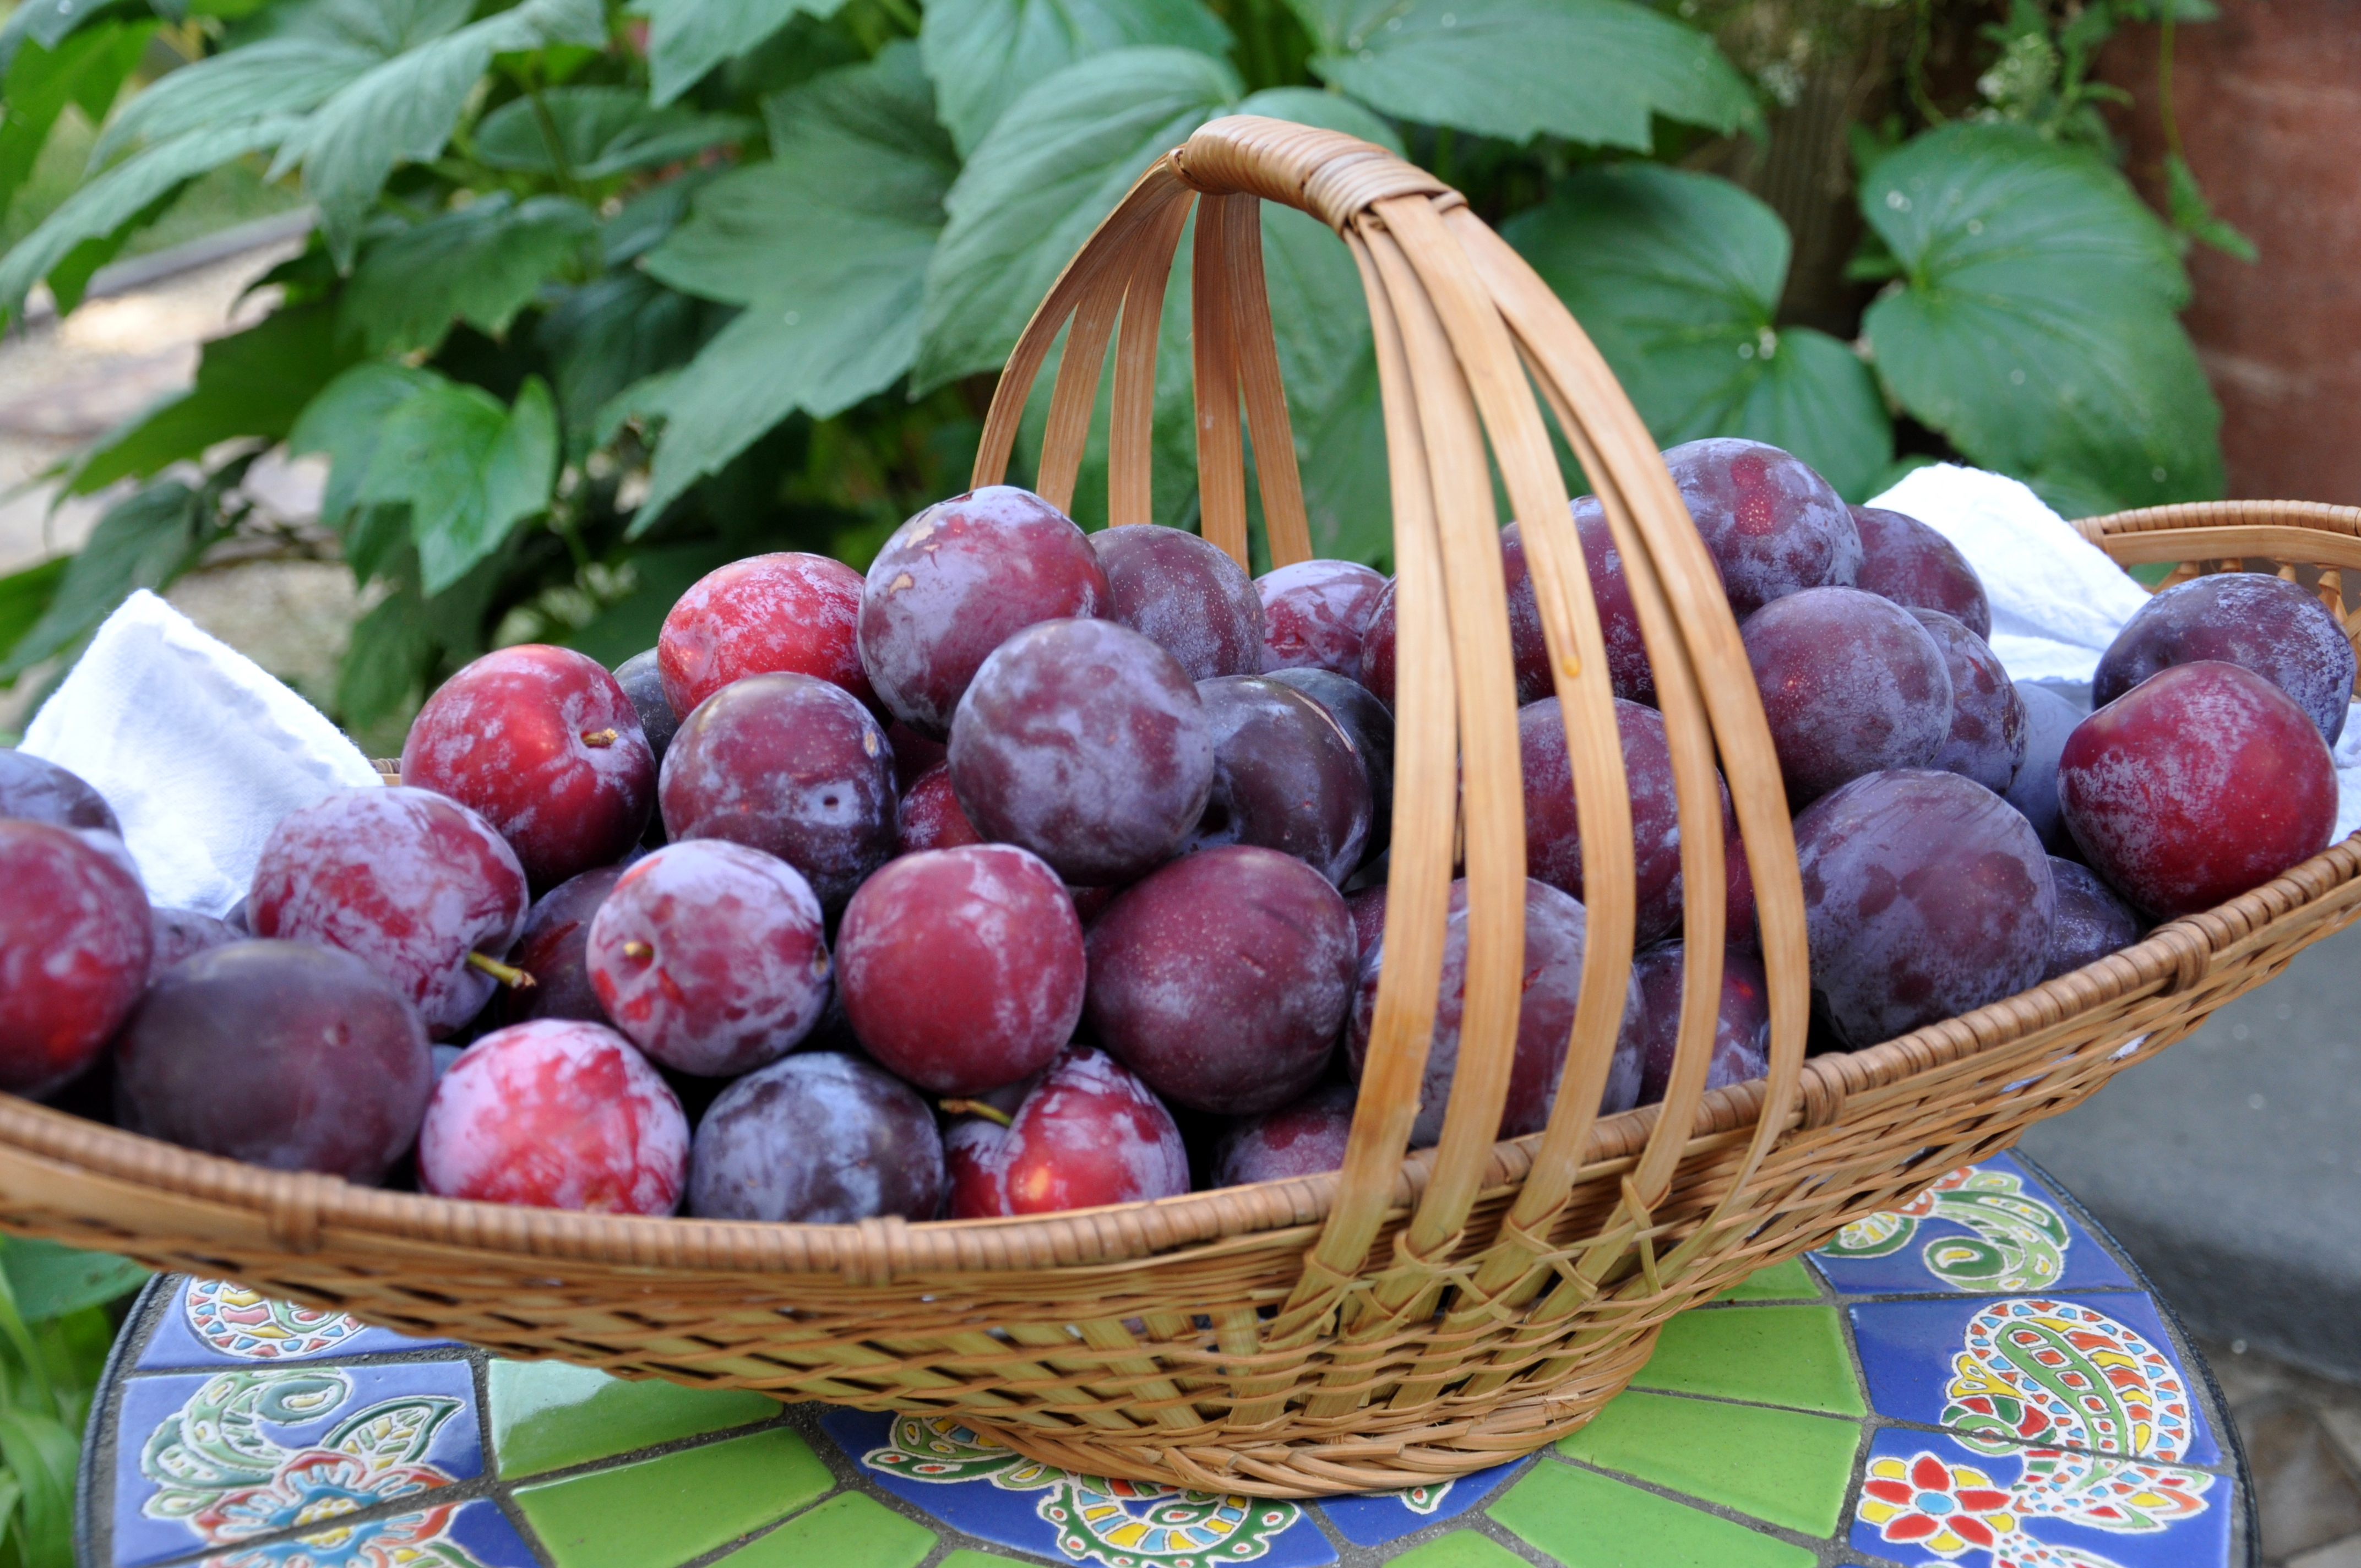 Basket of Plums.